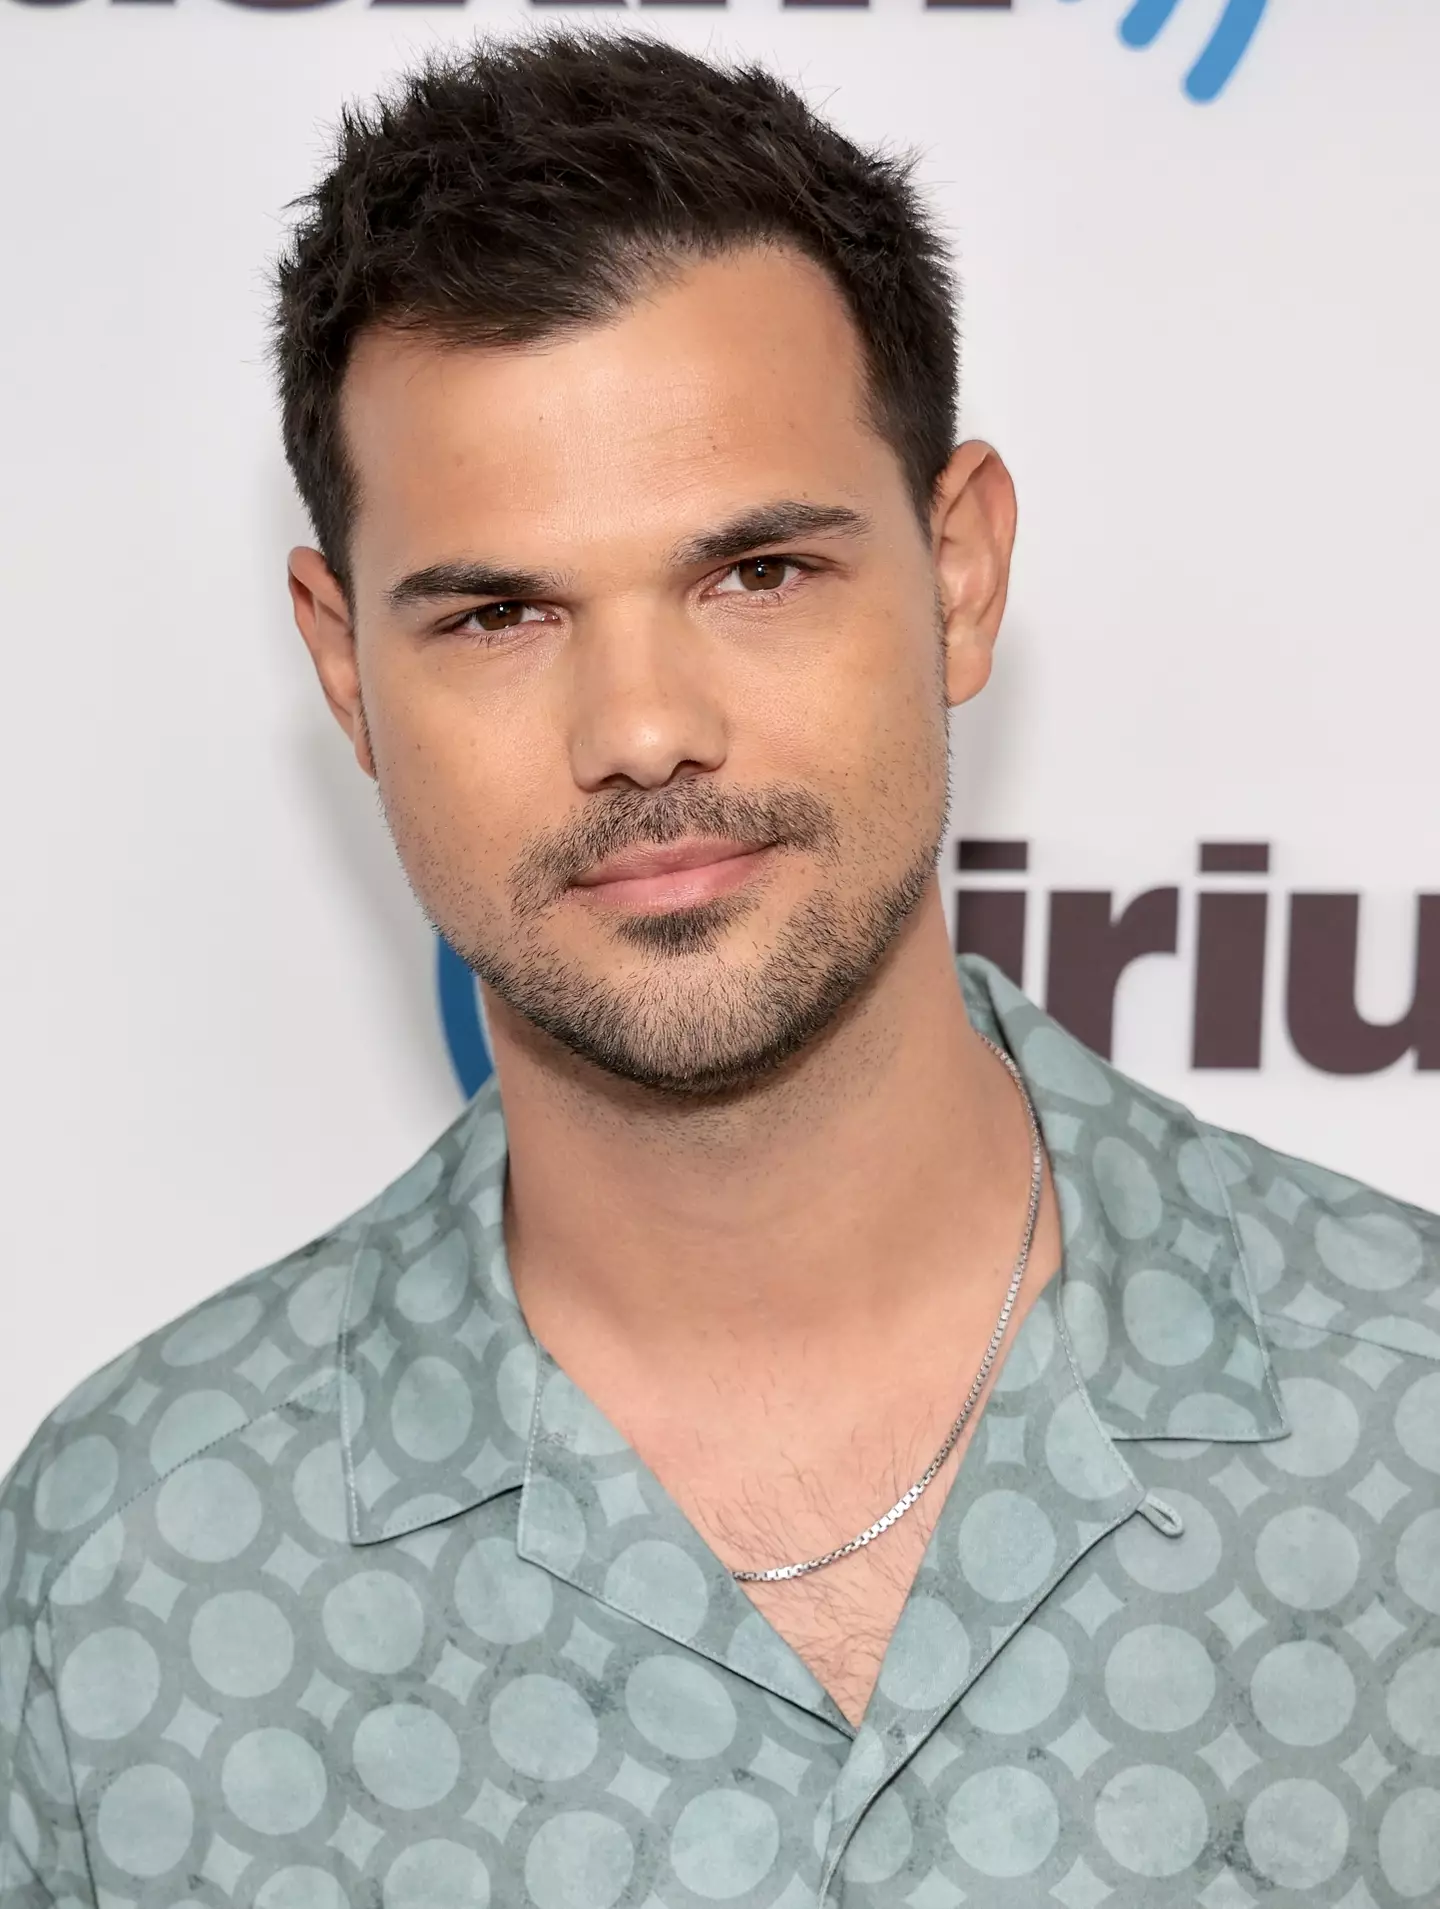 Taylor Lautner opened up about the impact sharing a name has.